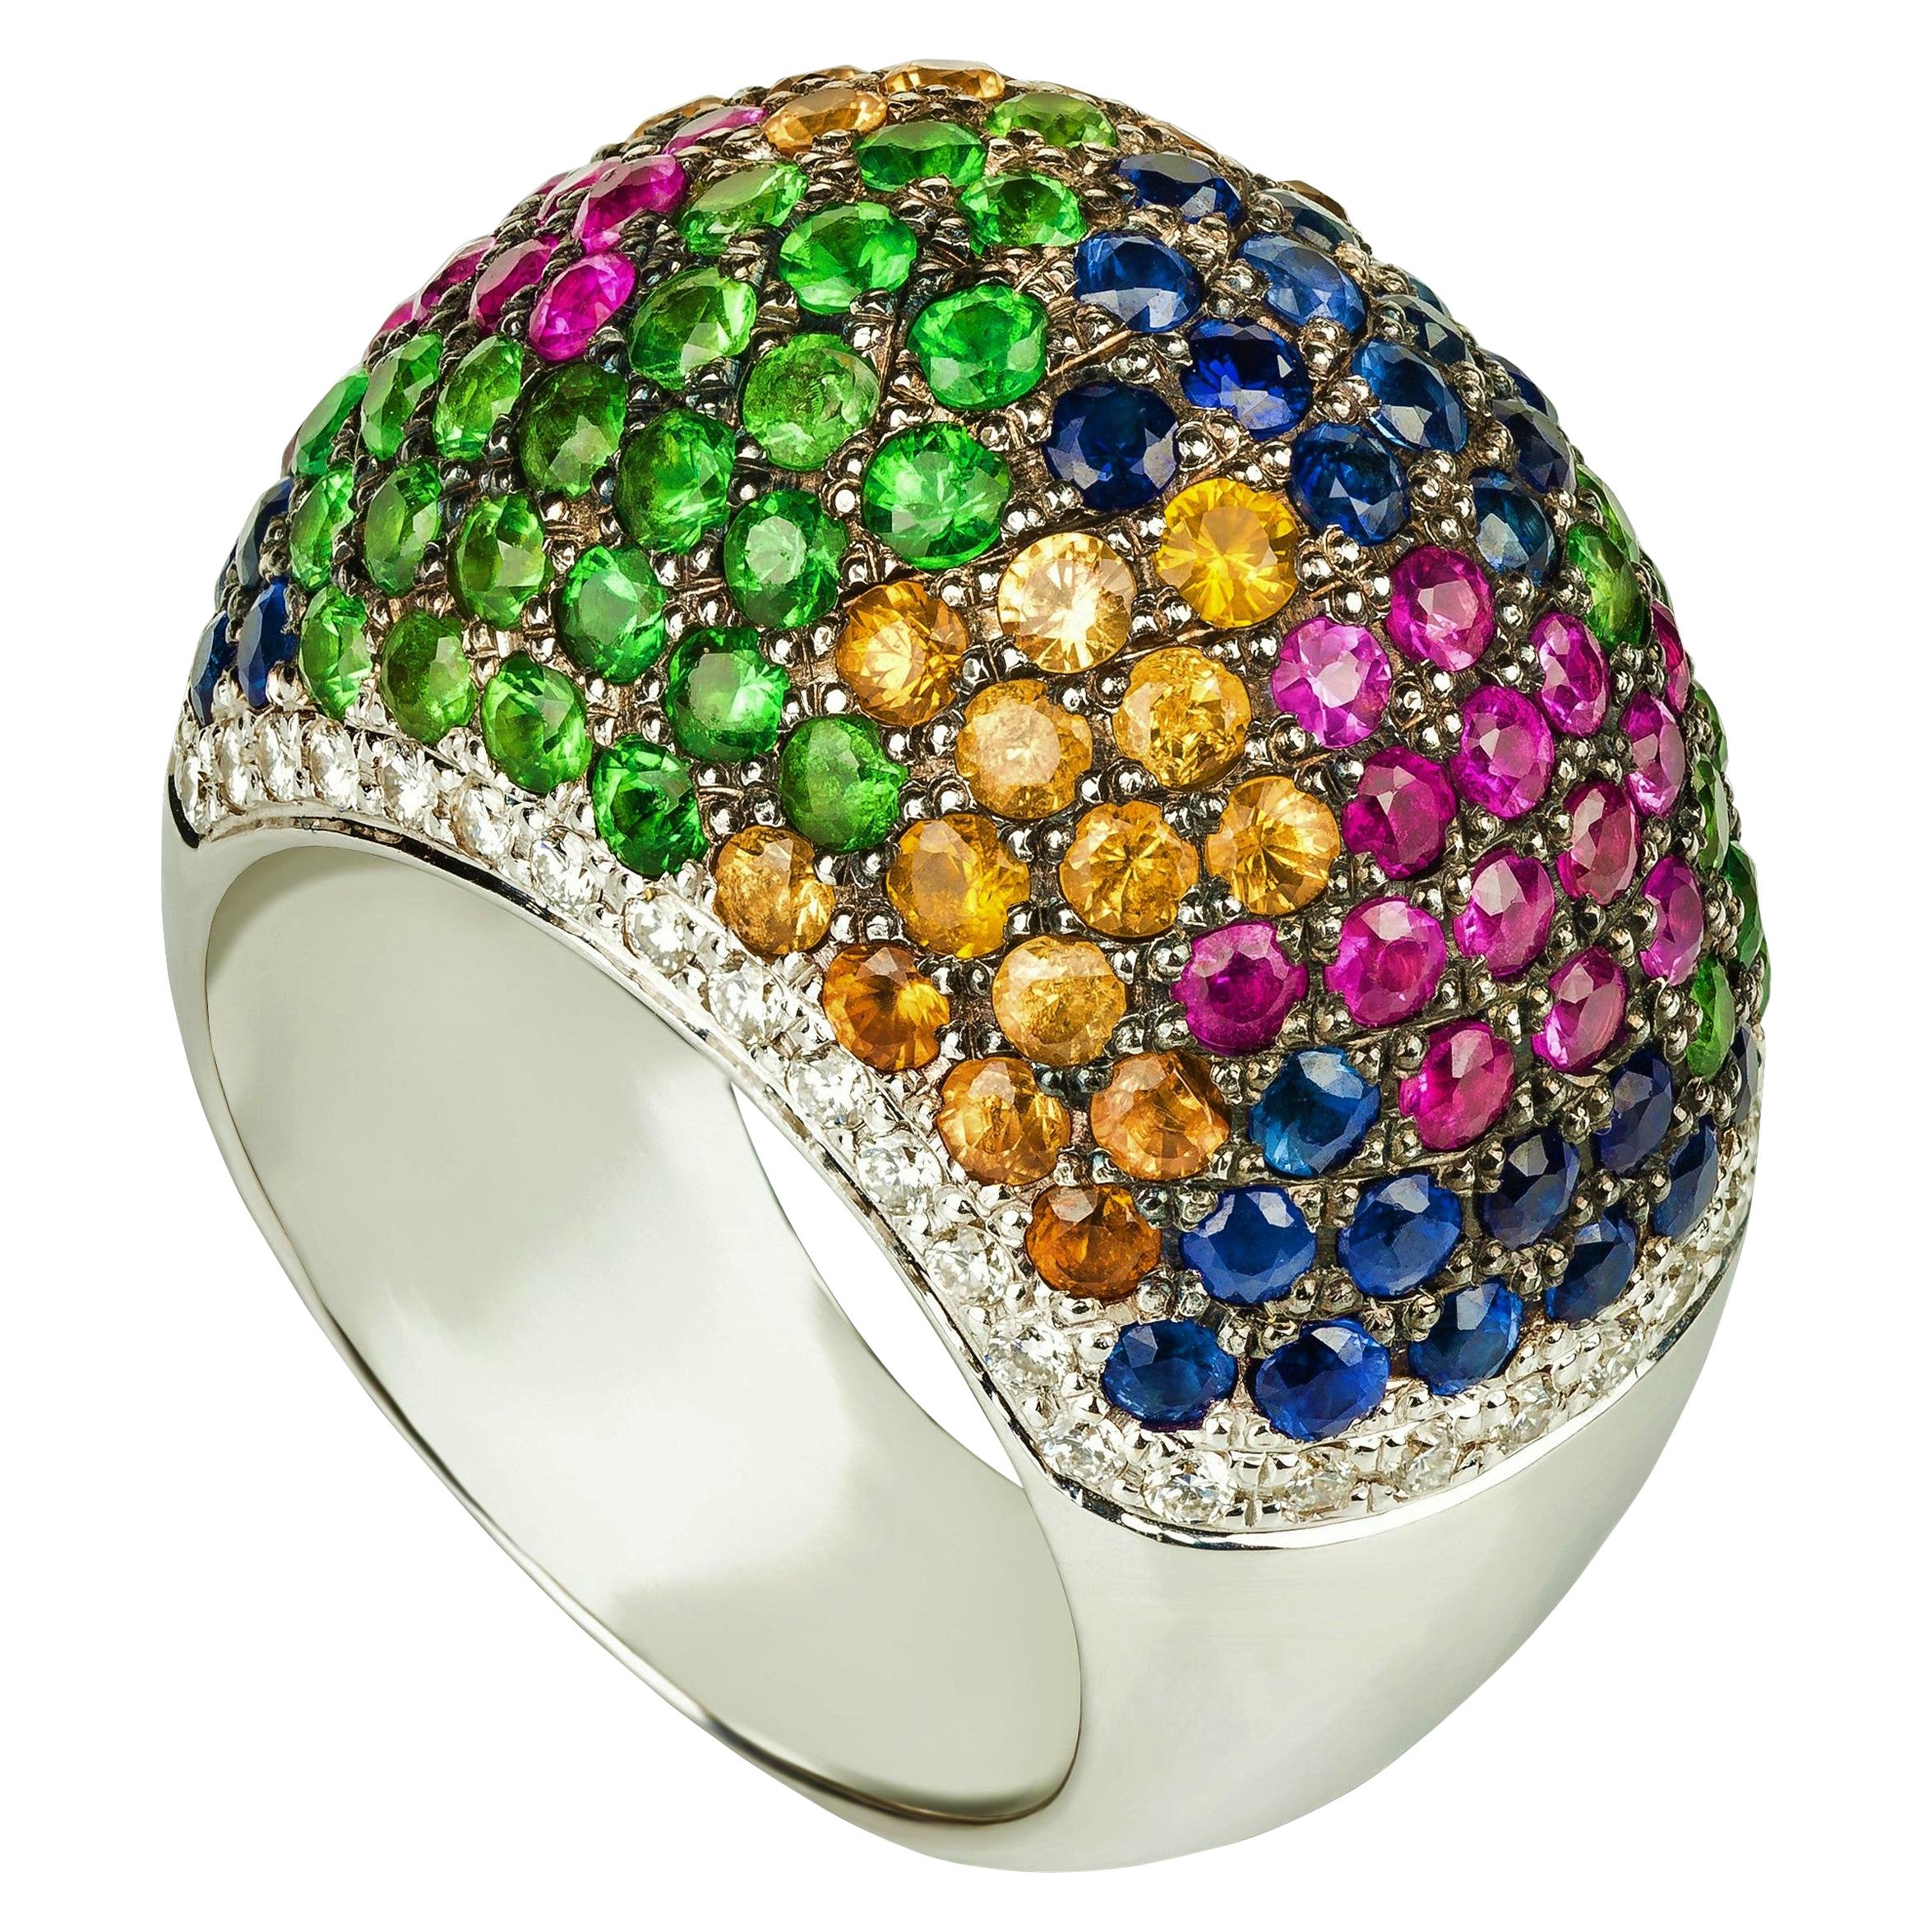 Rosior one-off Diamond, Sapphire and Tsavorite Cocktail Ring set in White Gold 